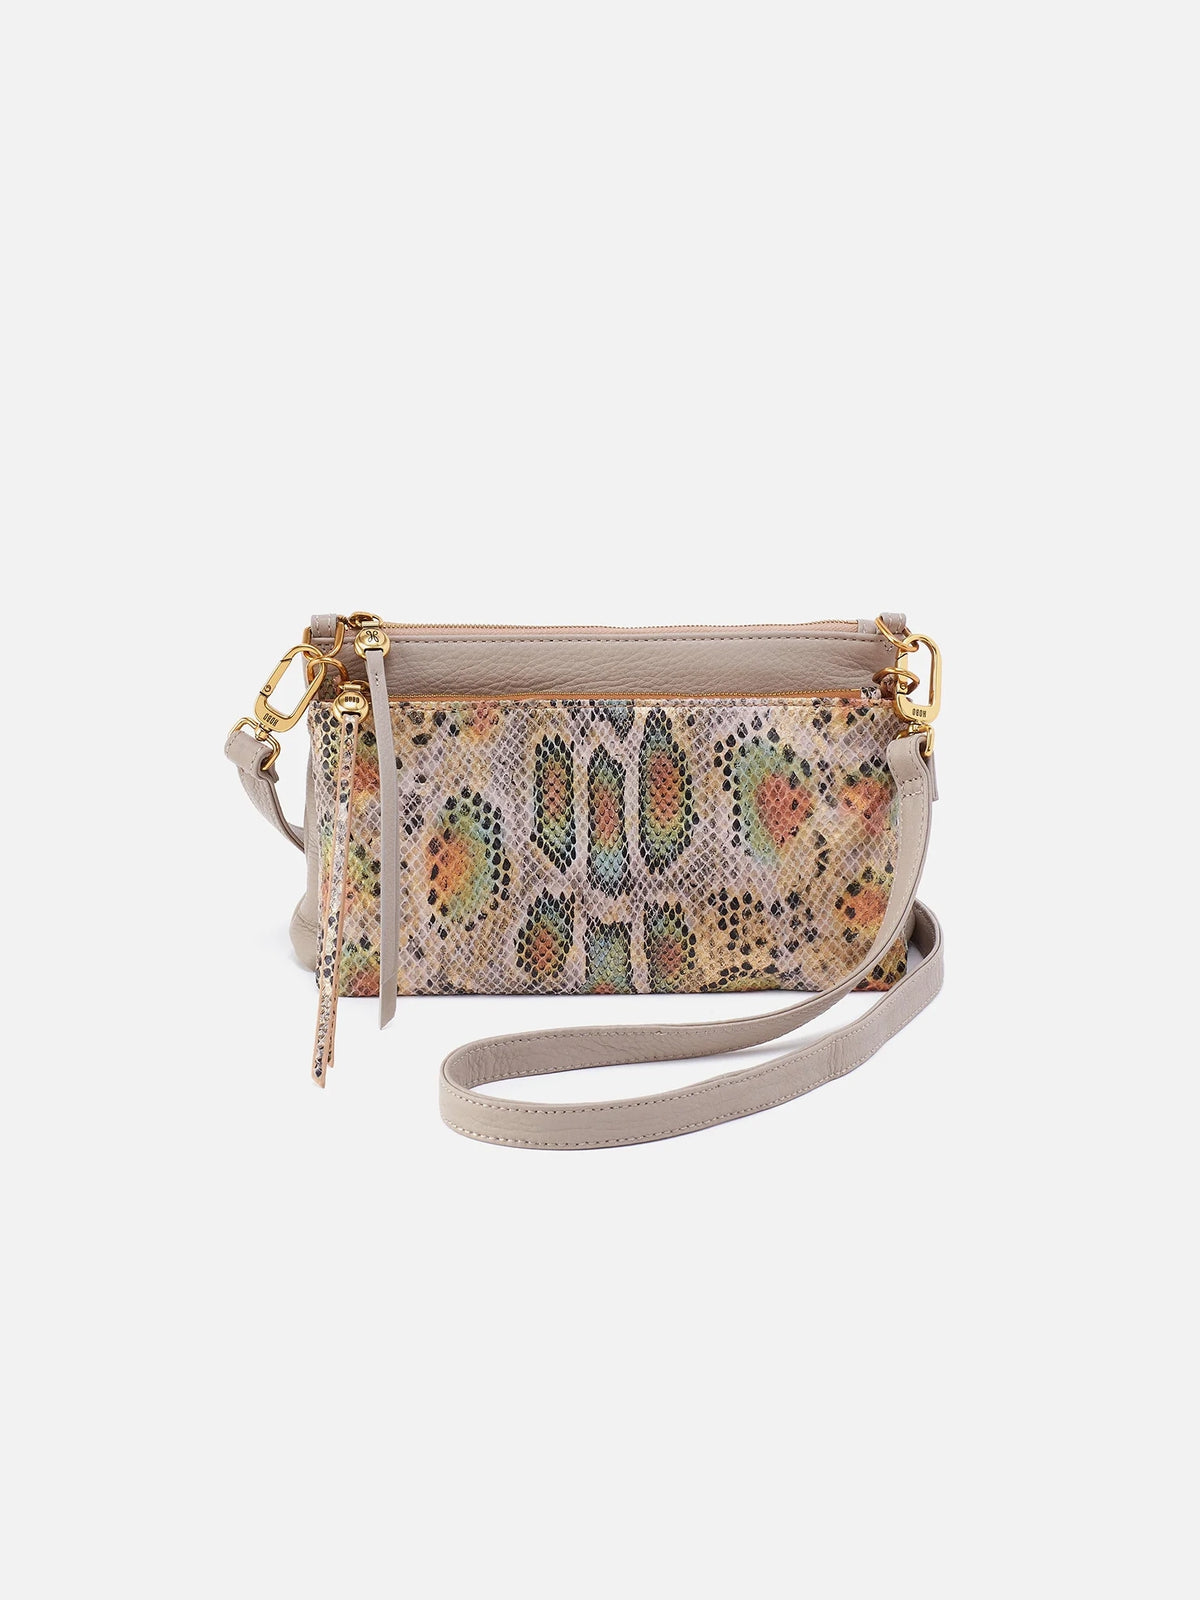 hobo darcy mix double crossbody in opal snake taupe-front view